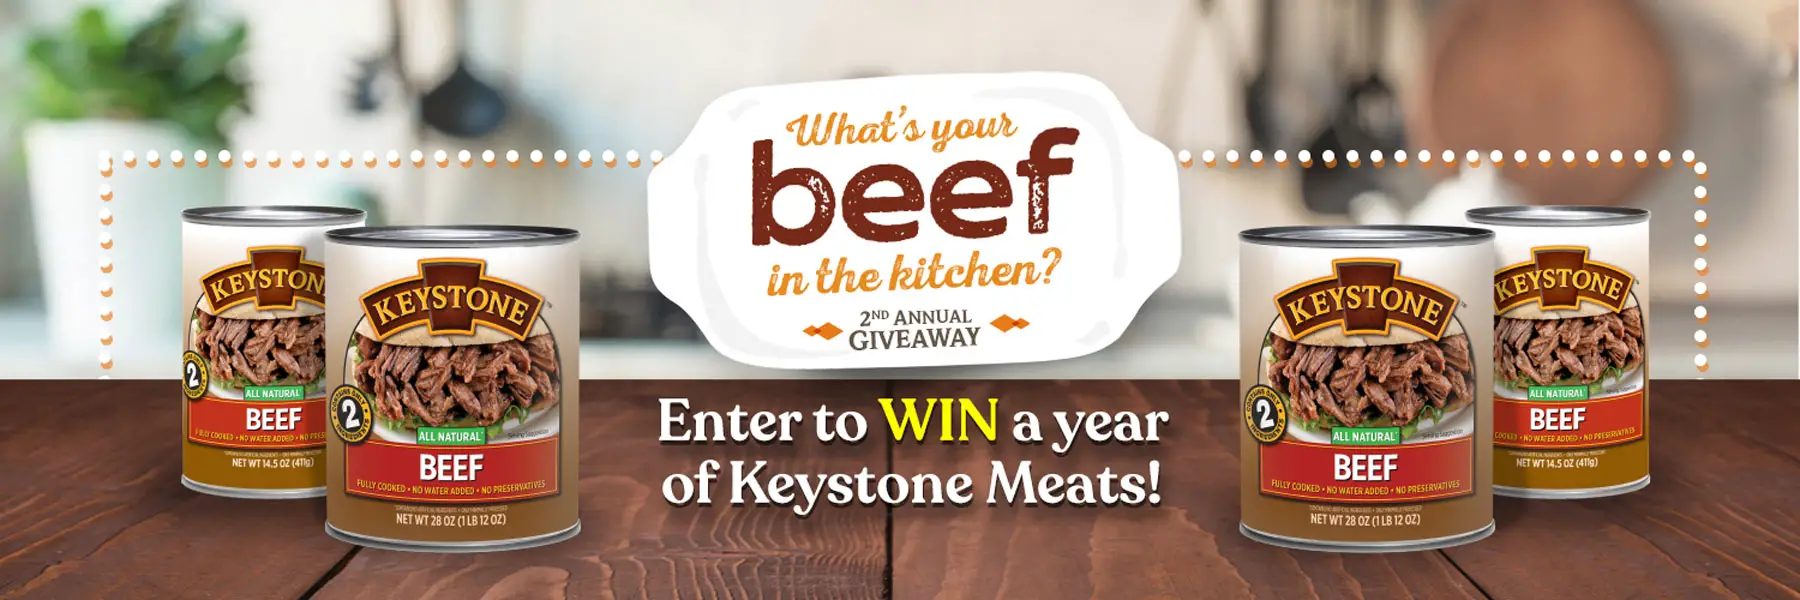 Enter for your chance to win a year’s worth of Keystone Meats products or a sample pack valued at approximately $70